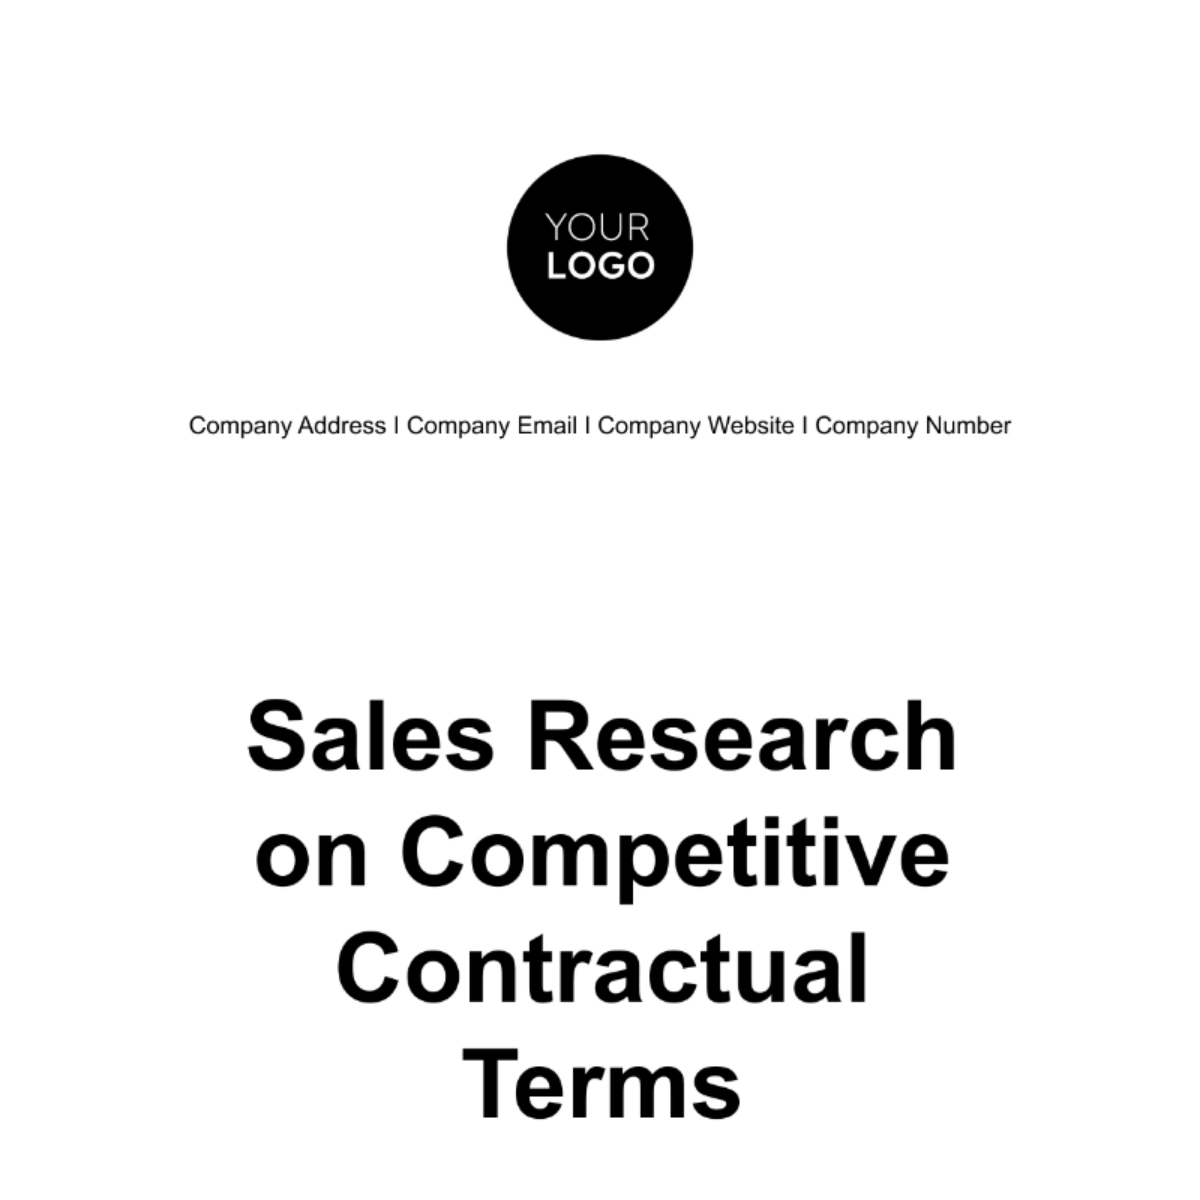 Sales Research on Competitive Contractual Terms Template